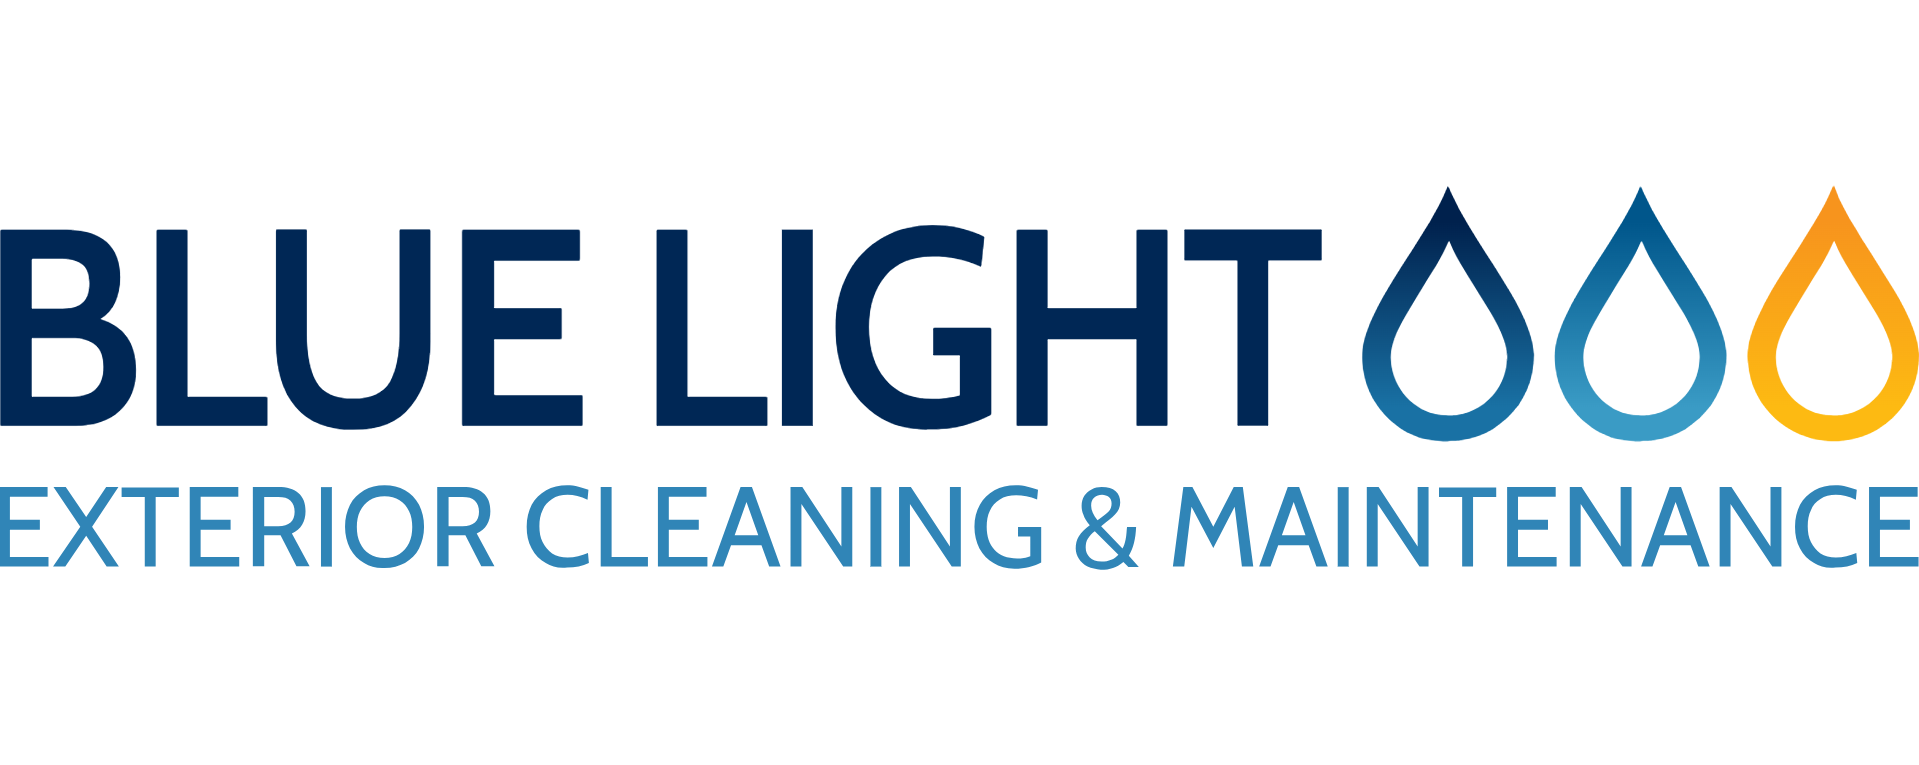 Logo of Blue Light Exterior Cleaning Cleaning Services In Ipswich, Sudbury